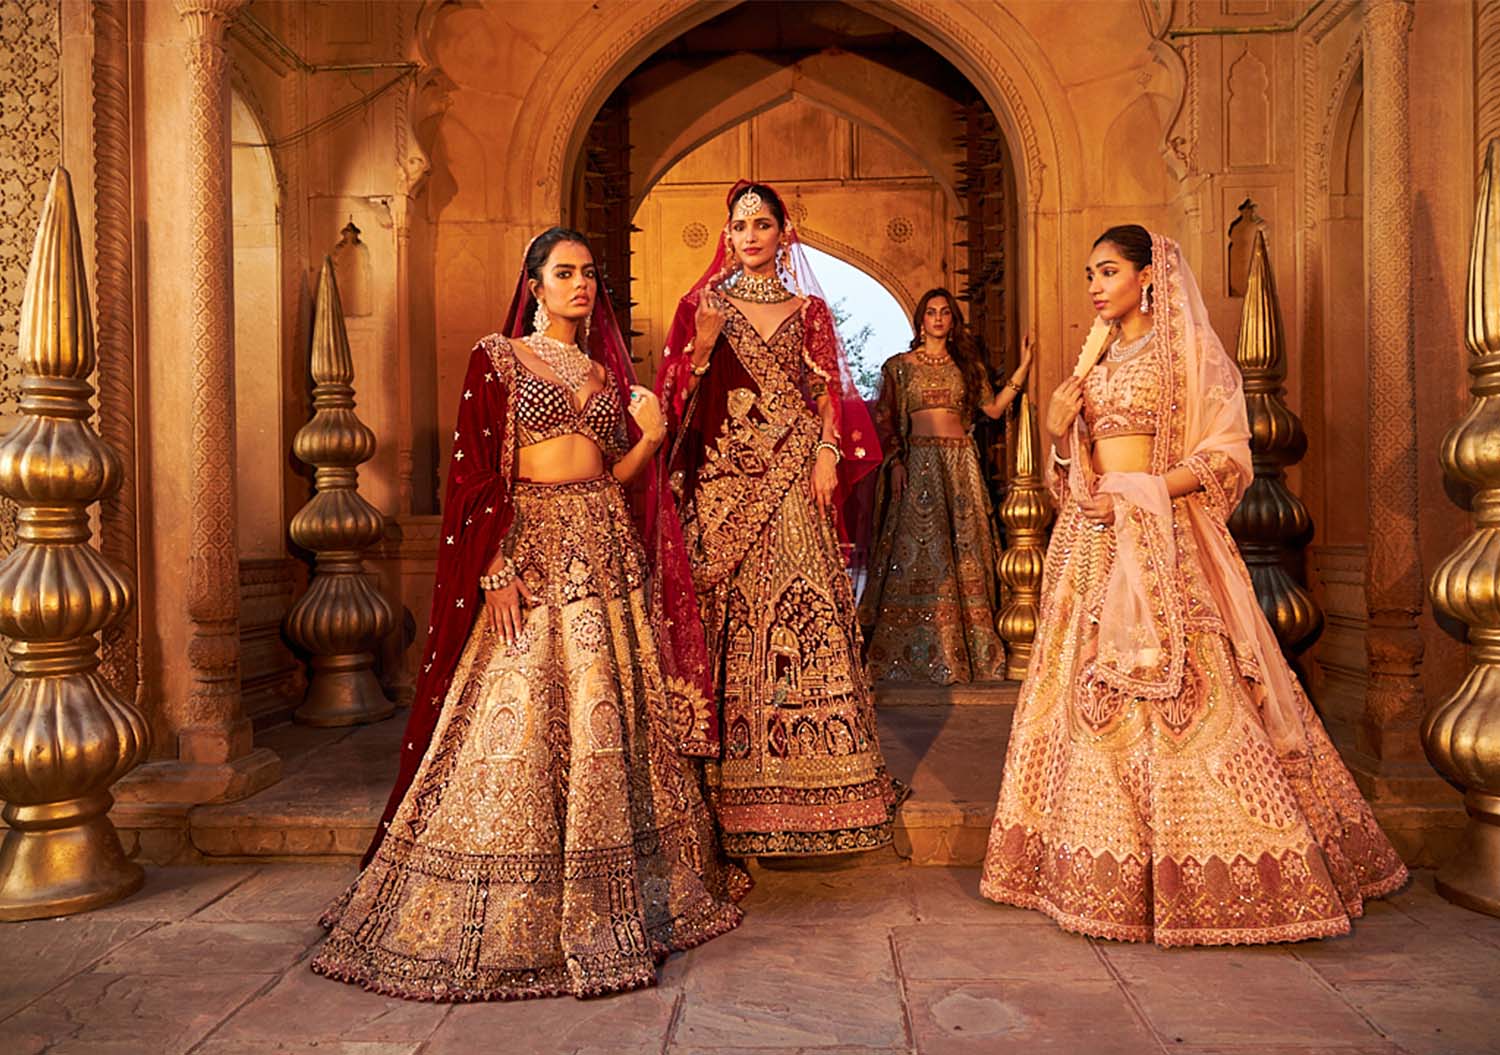 From Sarees to Lehengas to Gowns: Exploring Indian Wedding